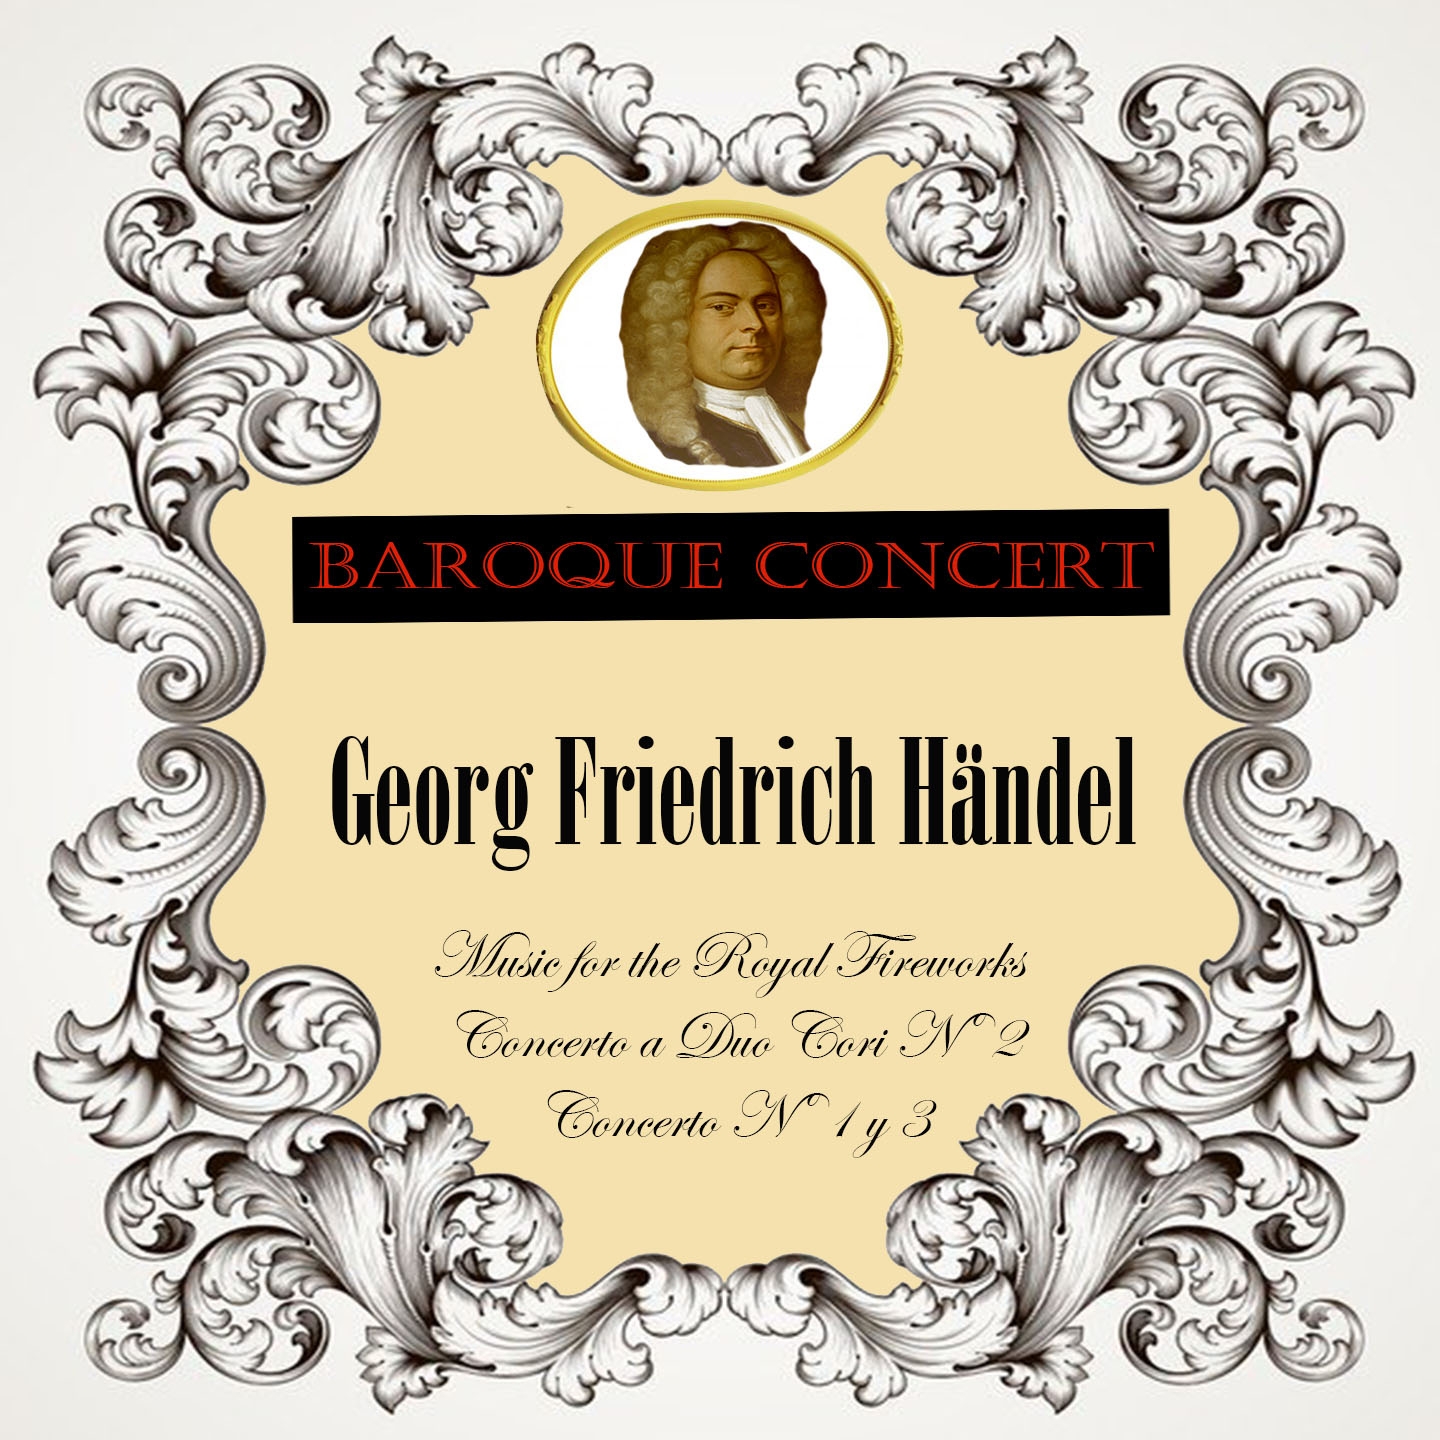 Baroque Concert, Georg Friedrich H ndel, Music for the Royal Fireworks, Concerto a Duo Cori N 2, Concerto N 1 y 3